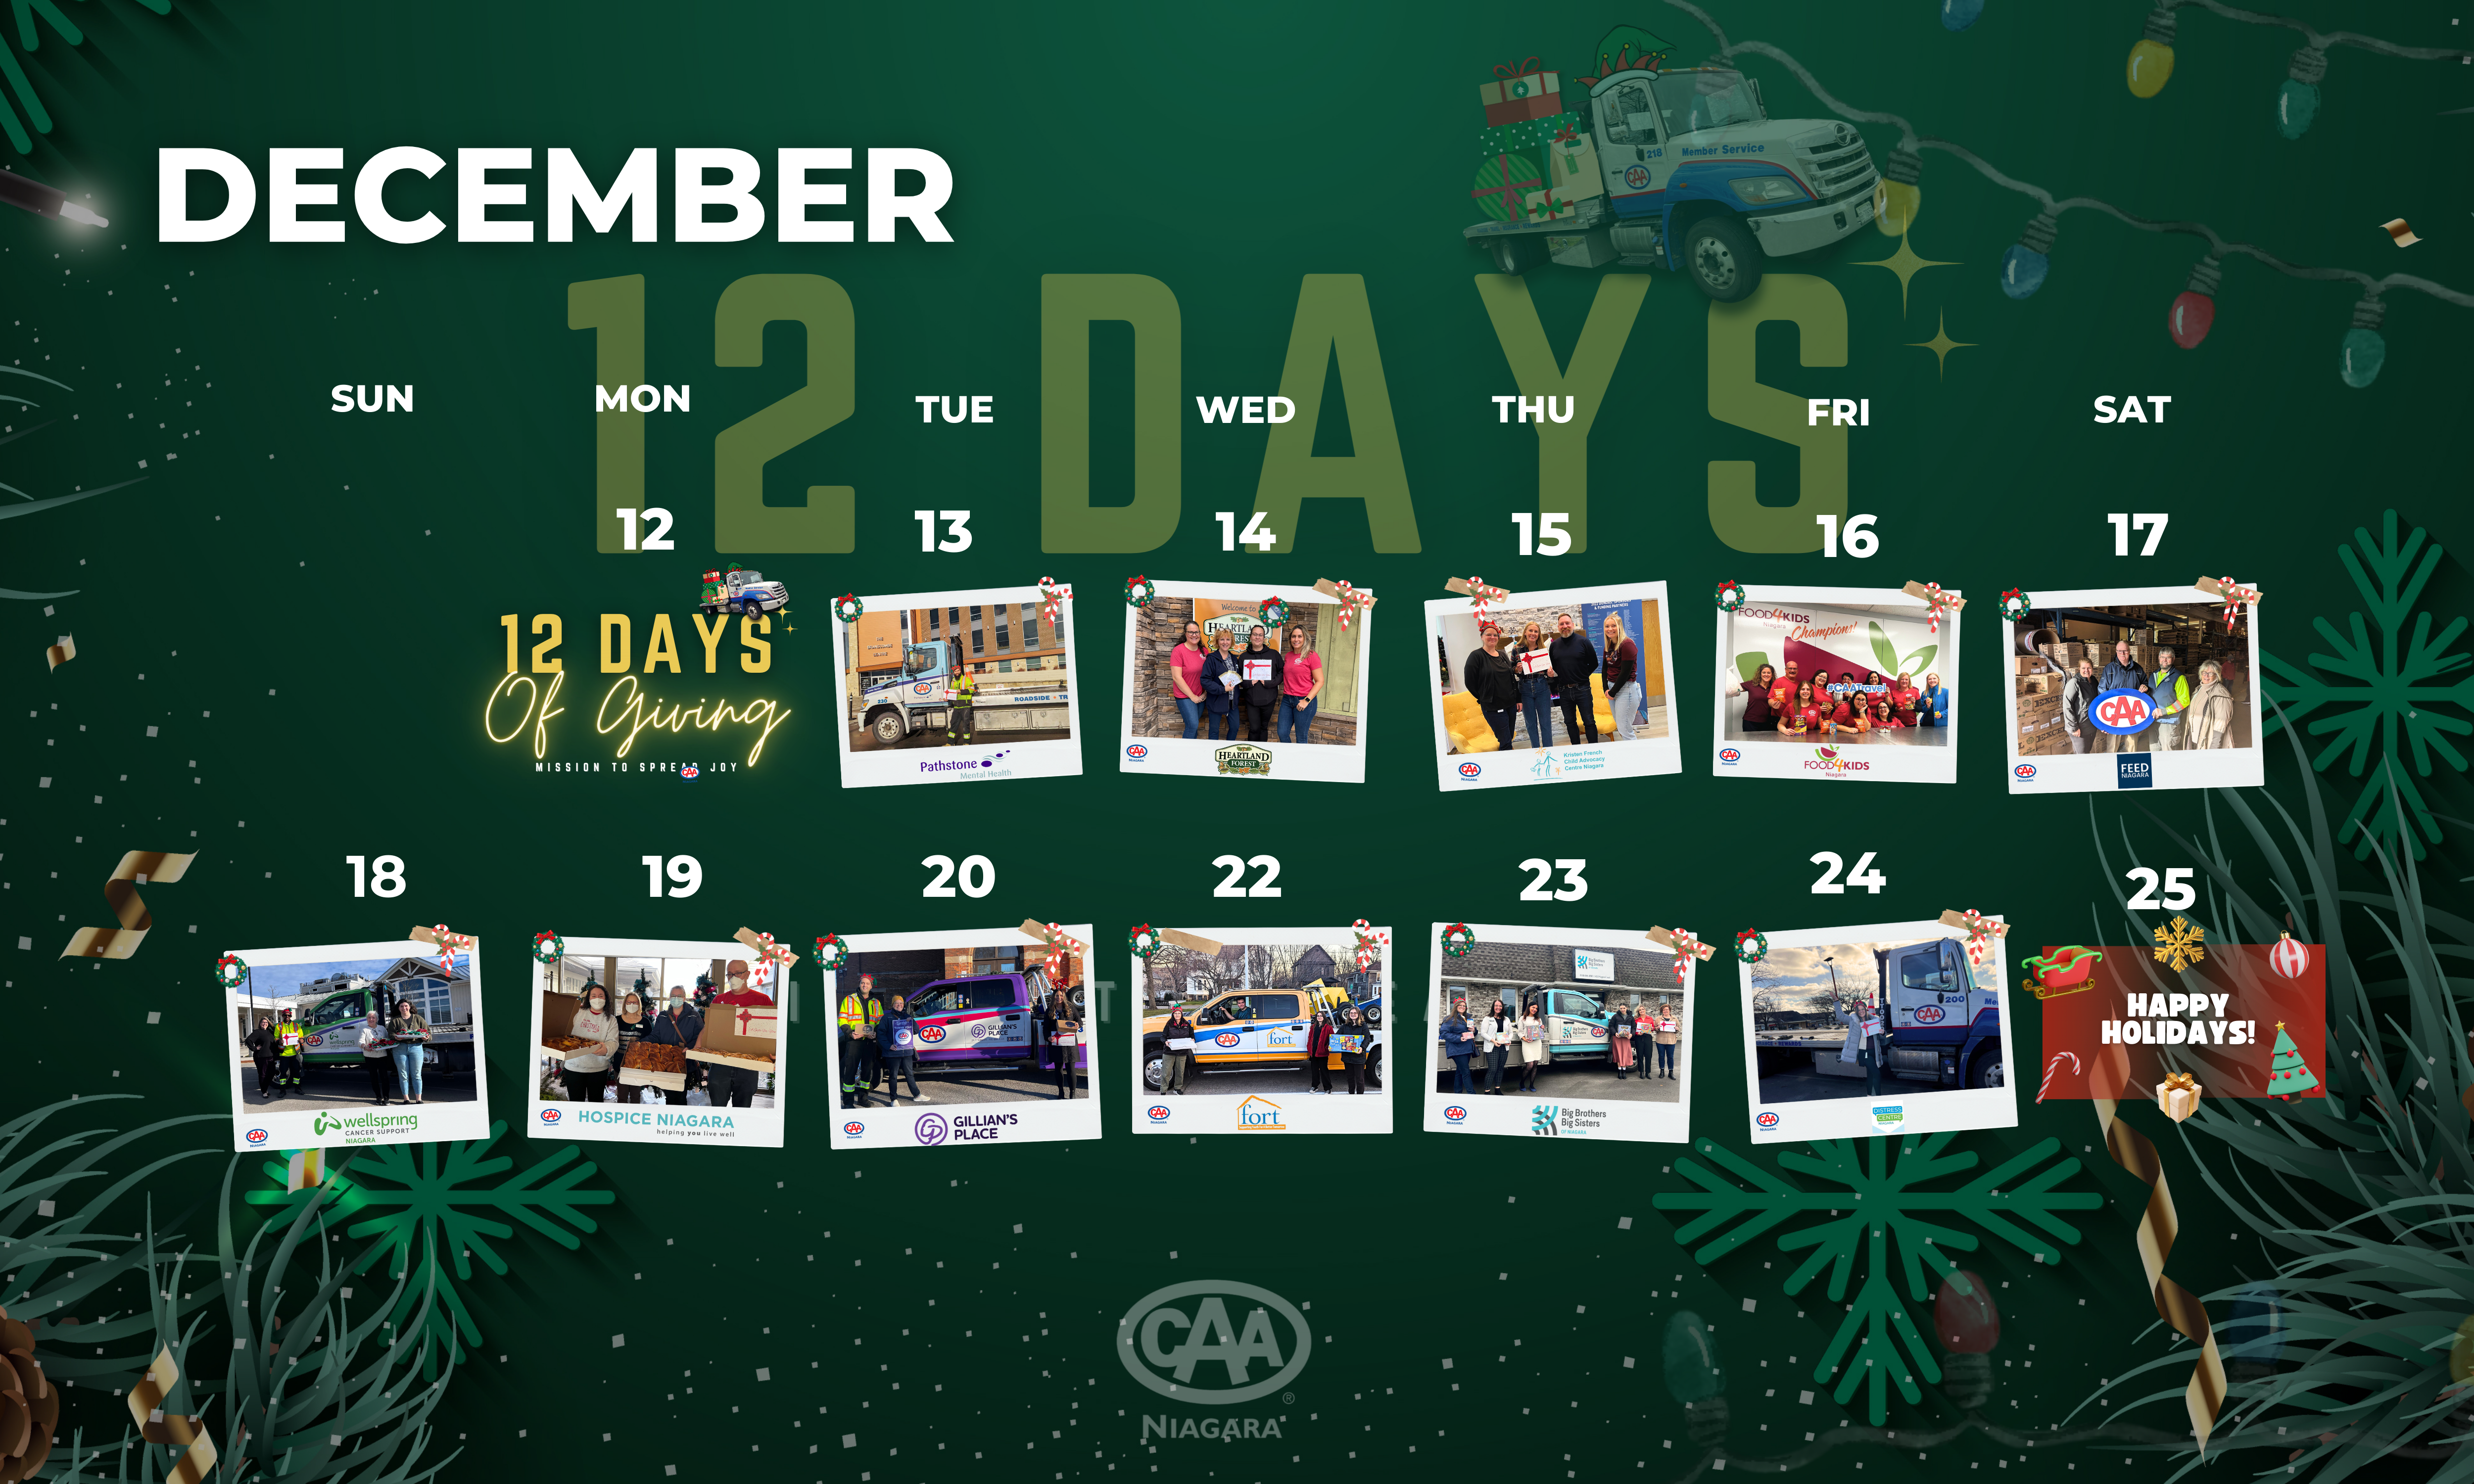 Calendar with an image of each 12 days delivery under each day from December 12-24.